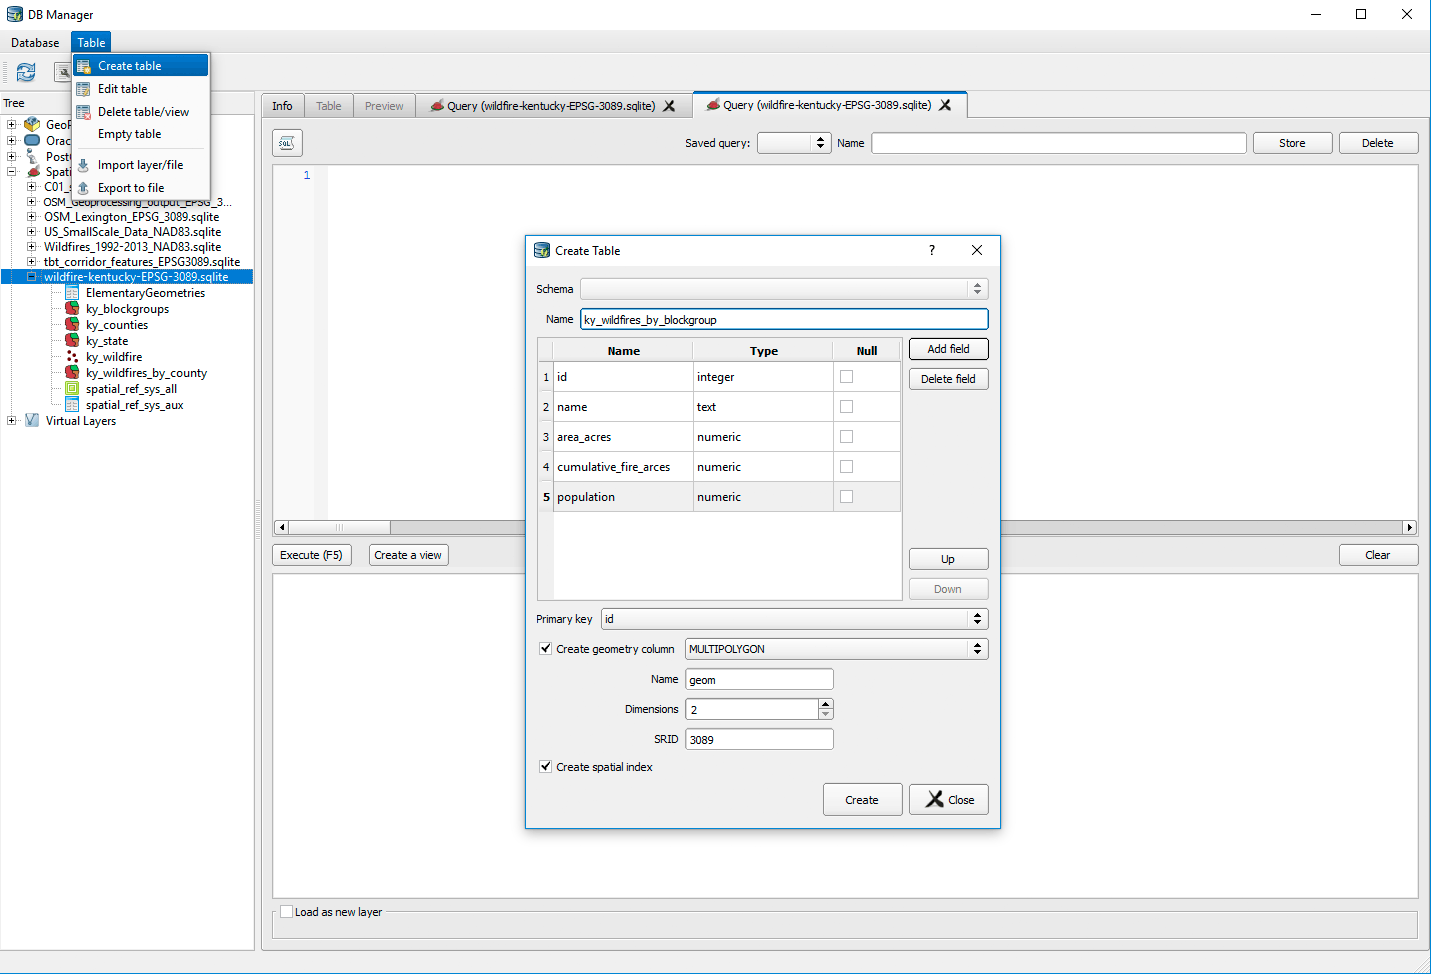 Create new table in DB Manager